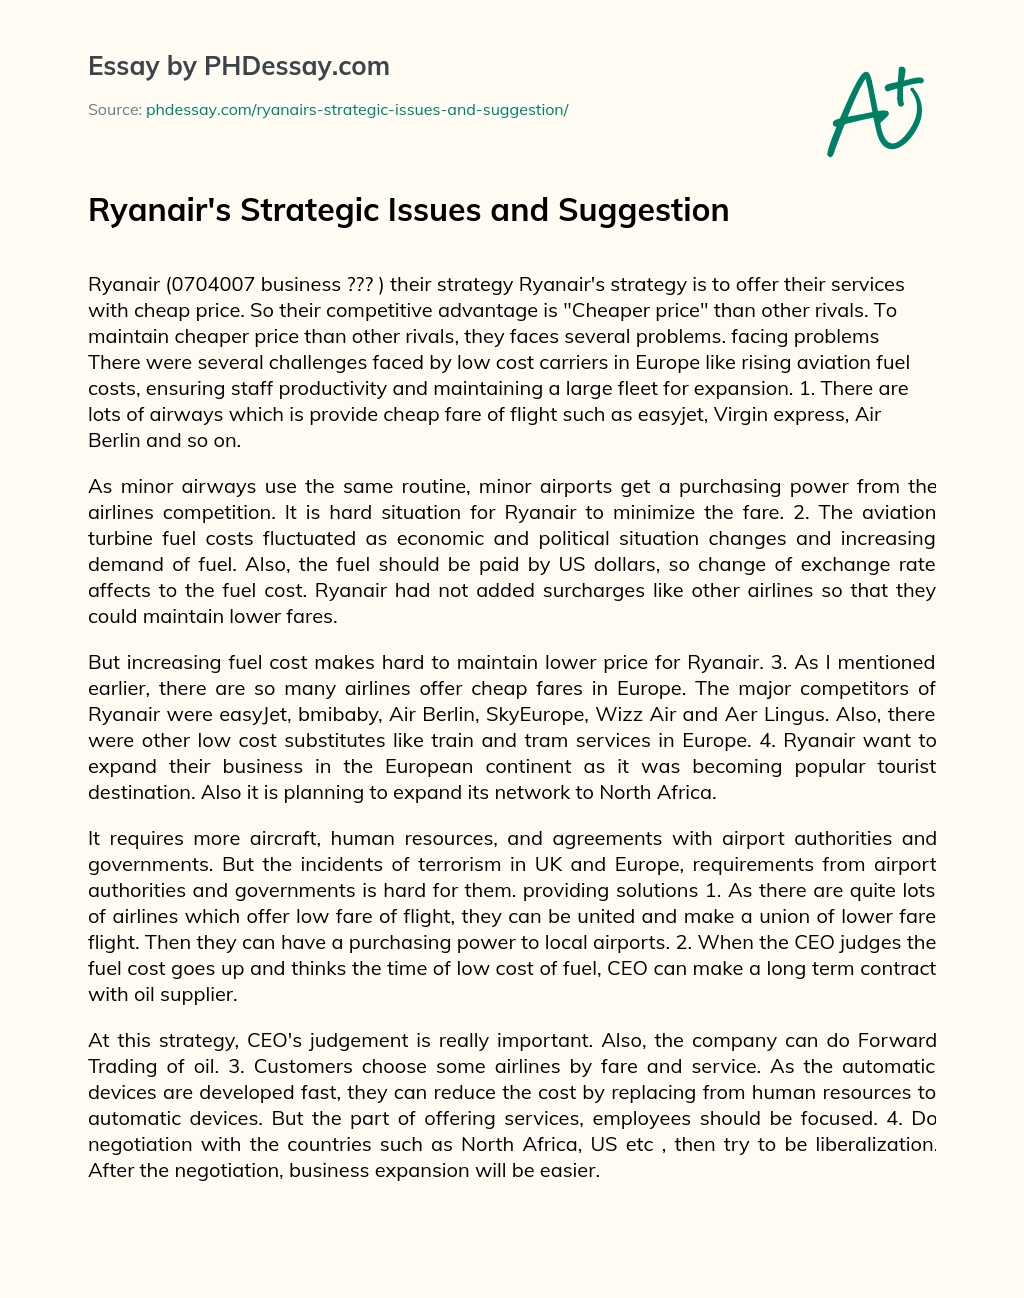 Ryanair’s Strategic Issues and Suggestion essay